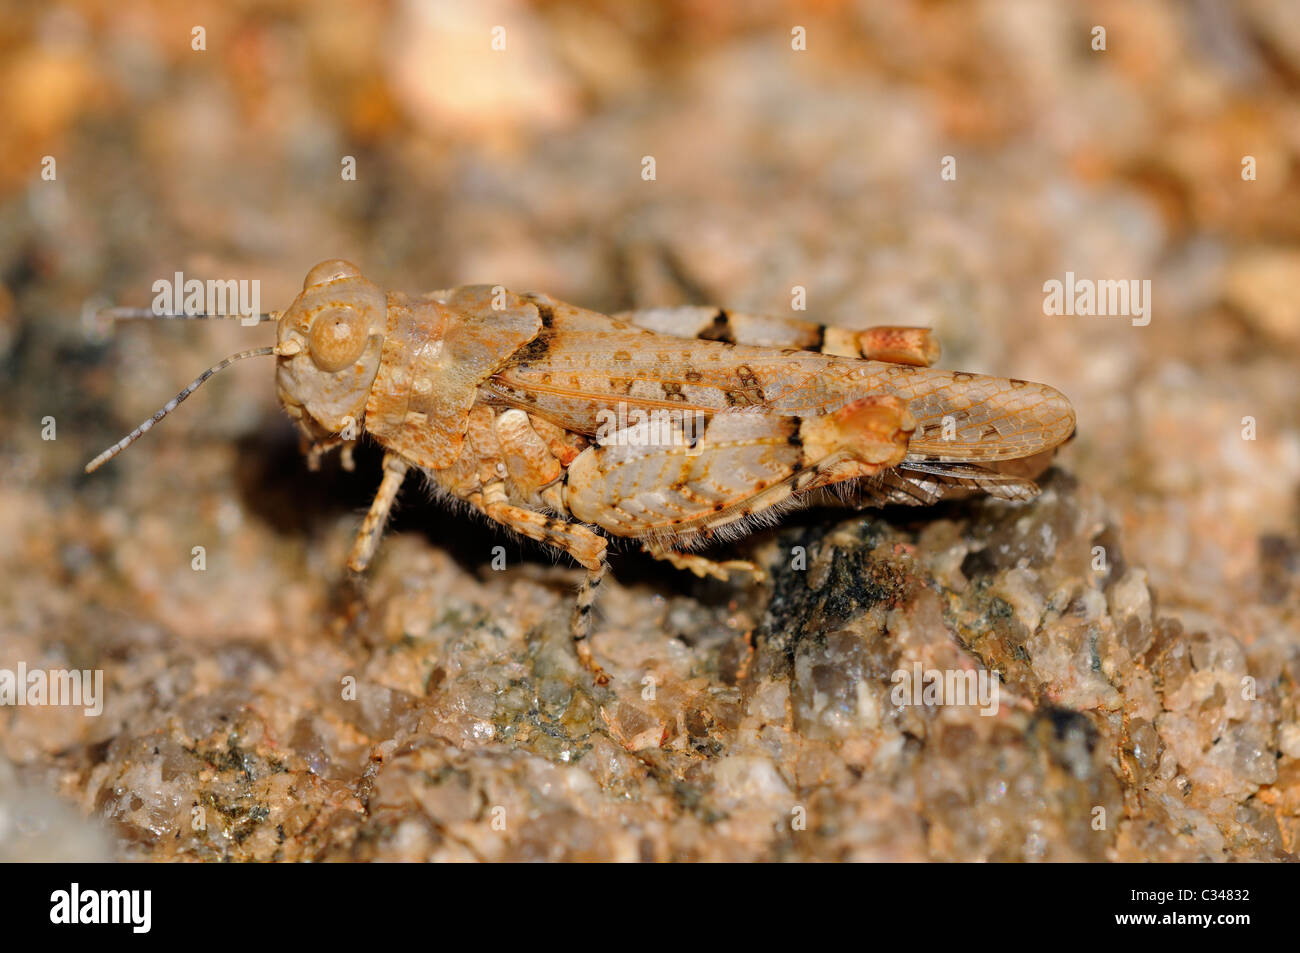 Short-horned grasshopper, Rhachitopsis mimicking the colors of the ground, Namqualand, South Africa Stock Photo